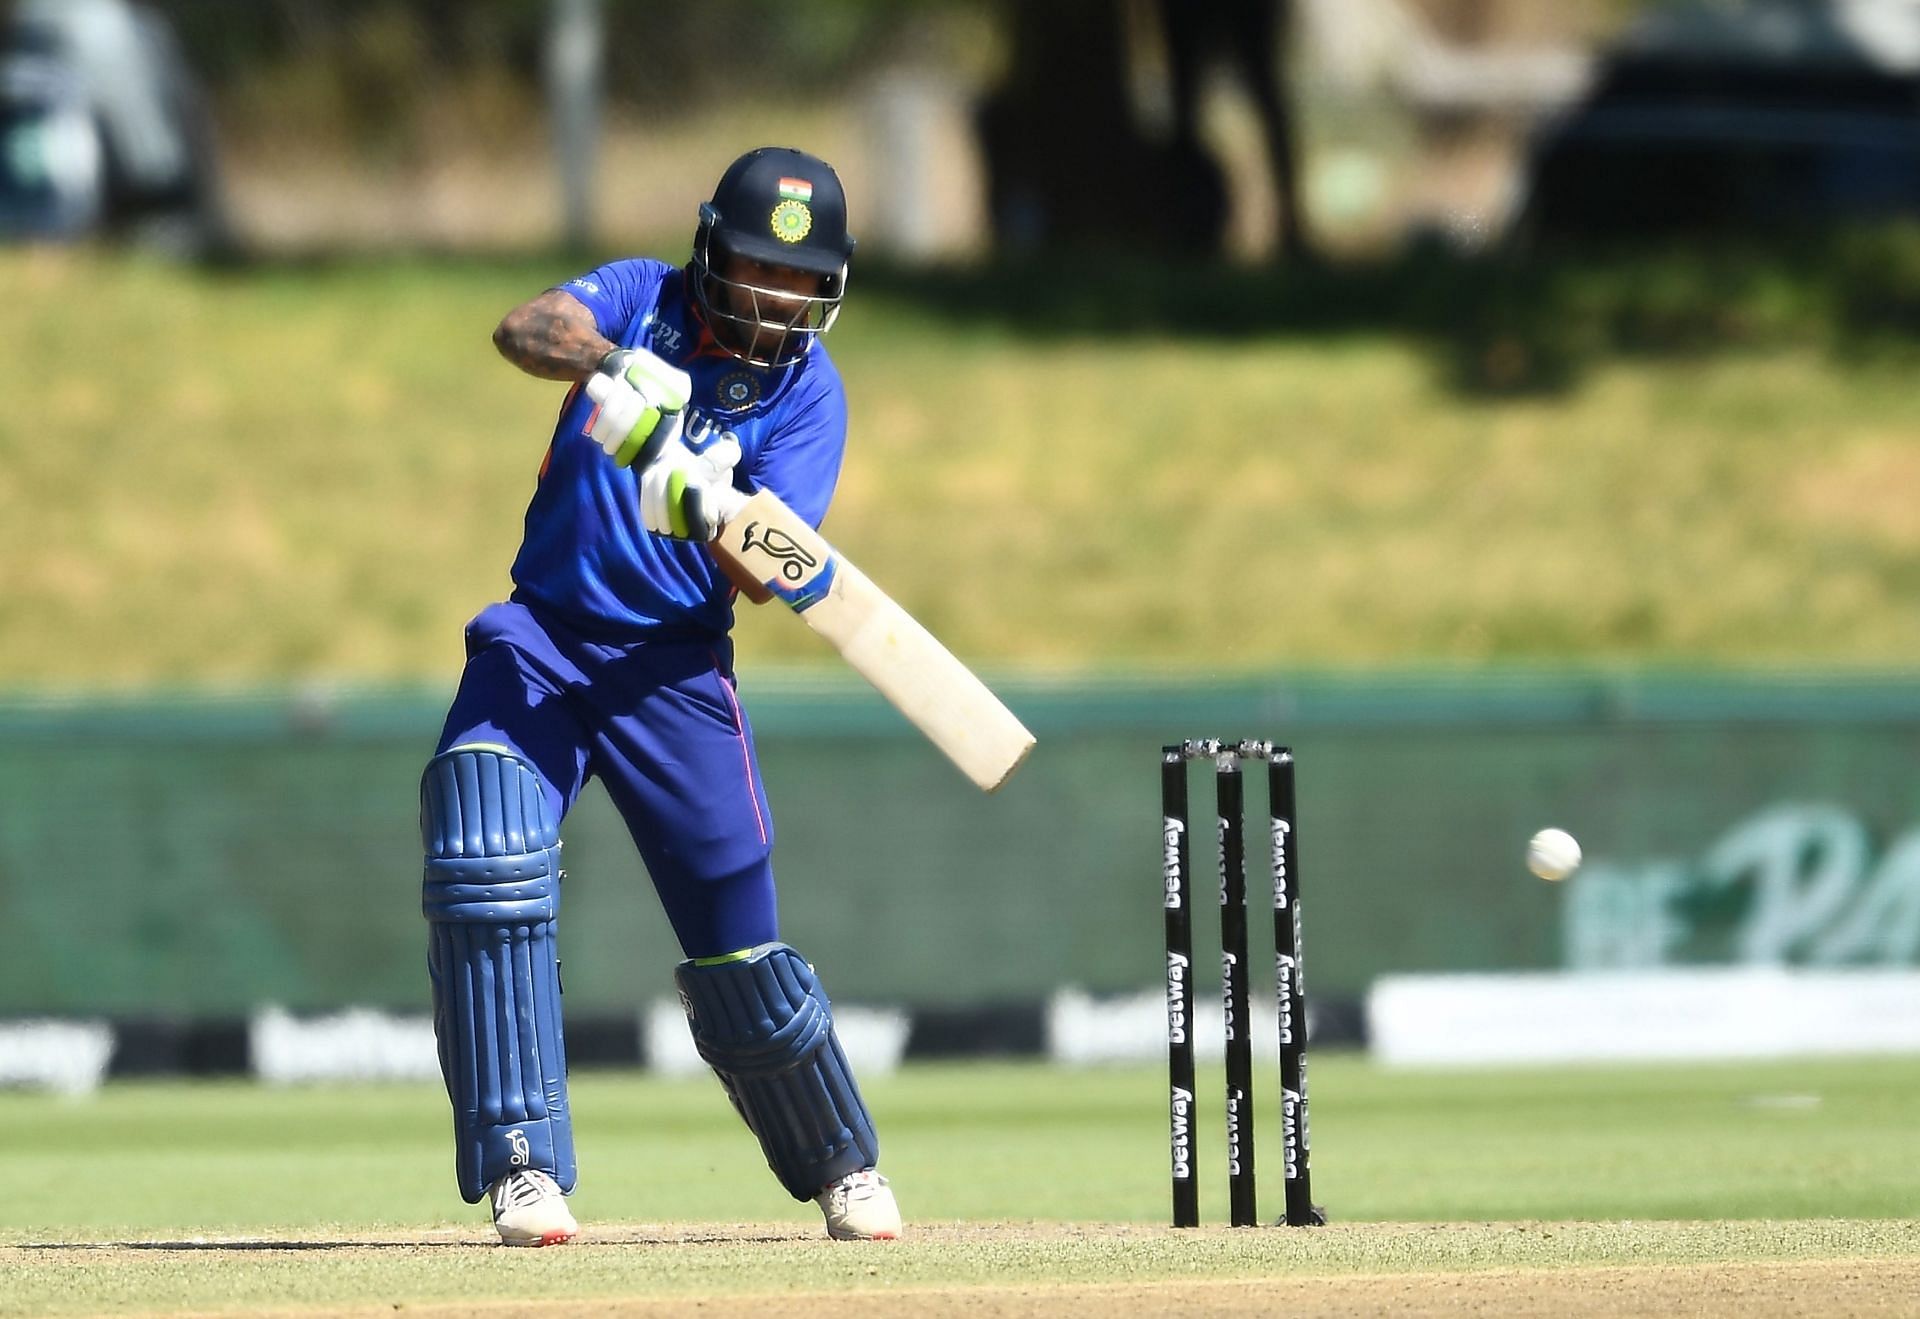 Dhawan looked close to his best at Paarl